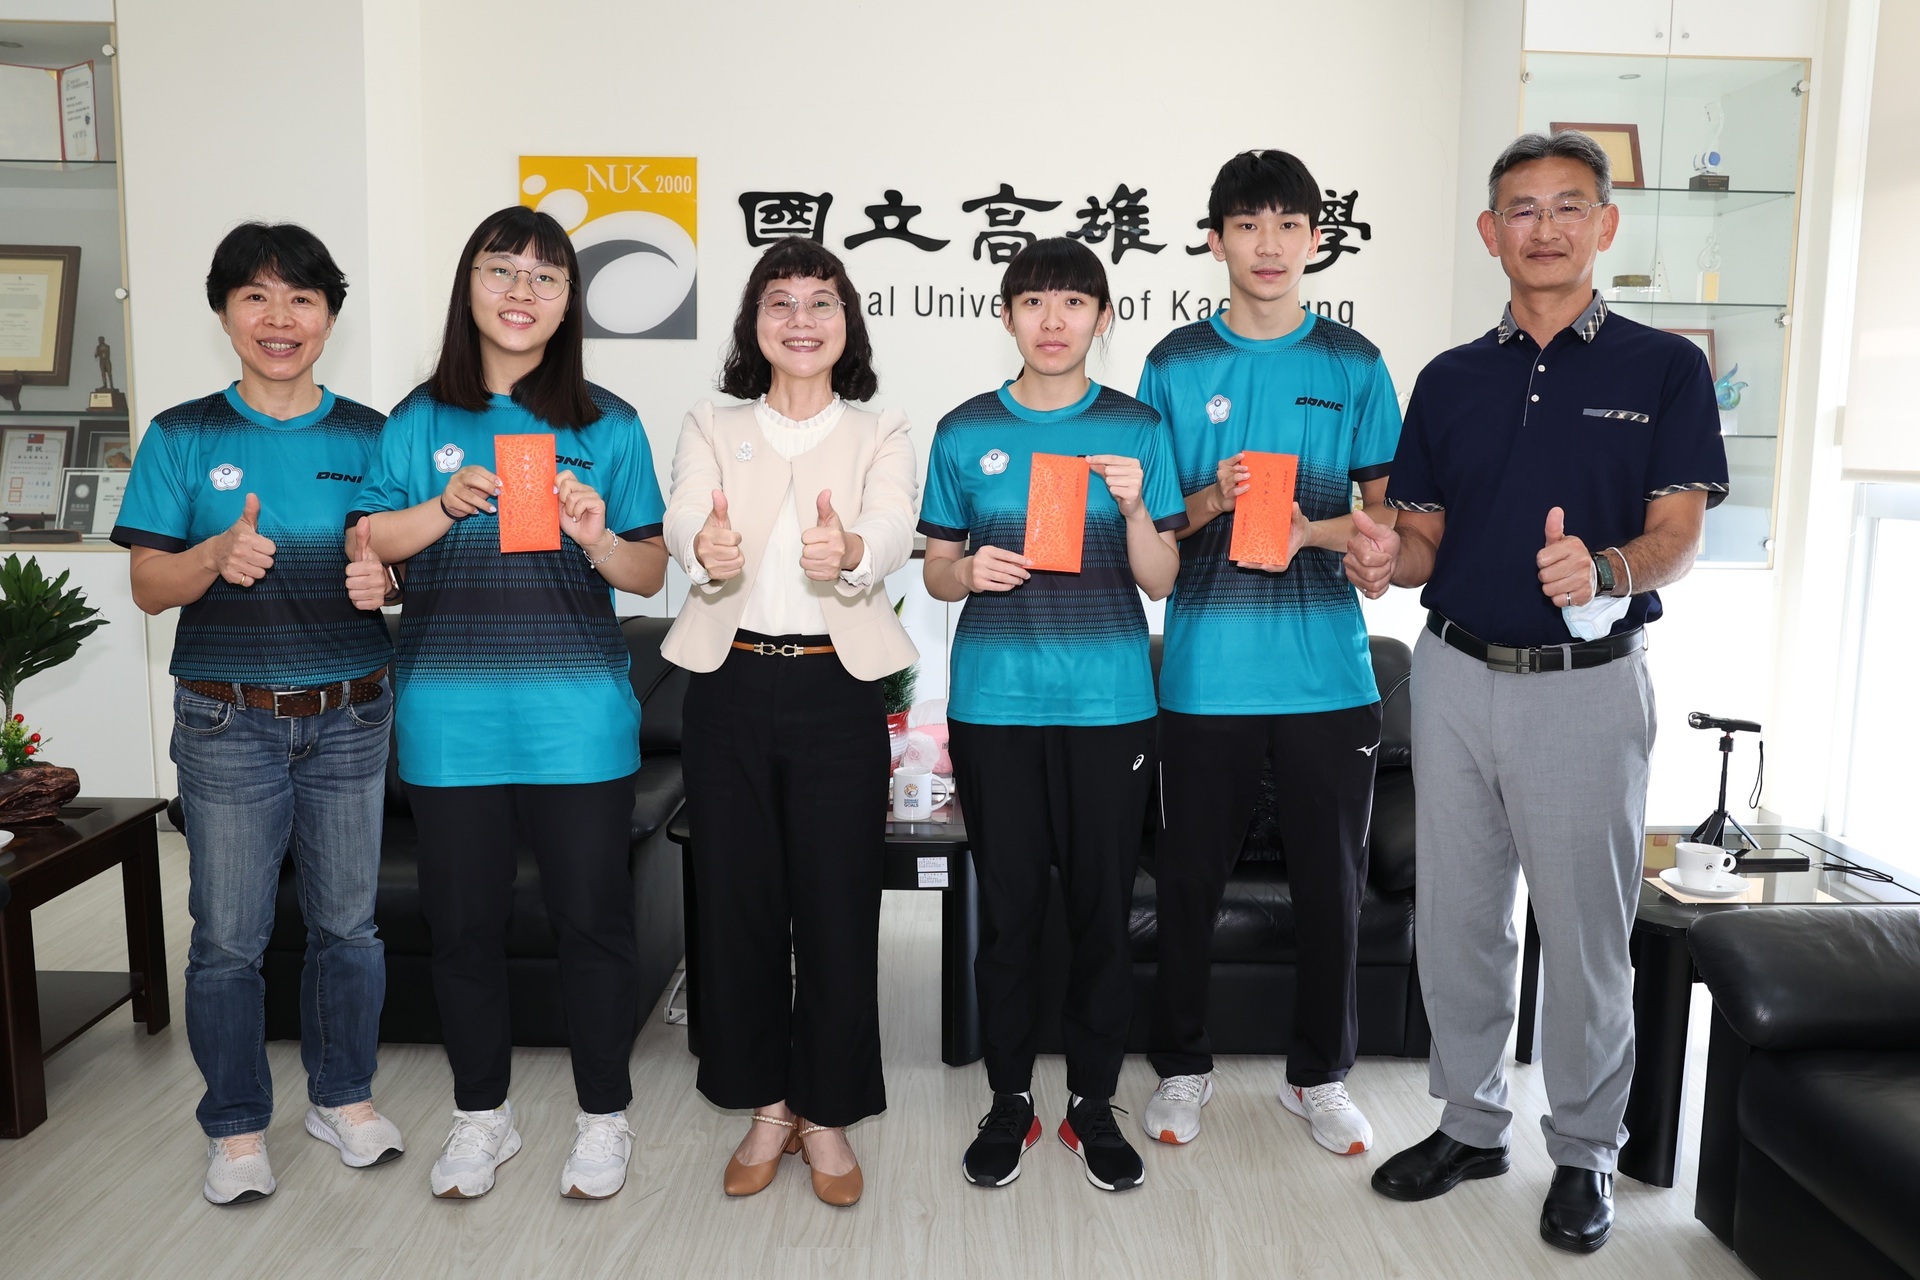 NUK President Chen Yueh-Duan(left3) received students Lin Tzu-Yu(right3), Tian Shiau-wen(left2), and Su Jin-Sian(right2), who represented Taiwan at the "2022 4th Asian Para Games (APG) in Hangzhou". Chair Chang, Chih-Cheng of DKHL(right1), and Chair Wang Ming-Yueh of DAP accompanied them to share the good news.